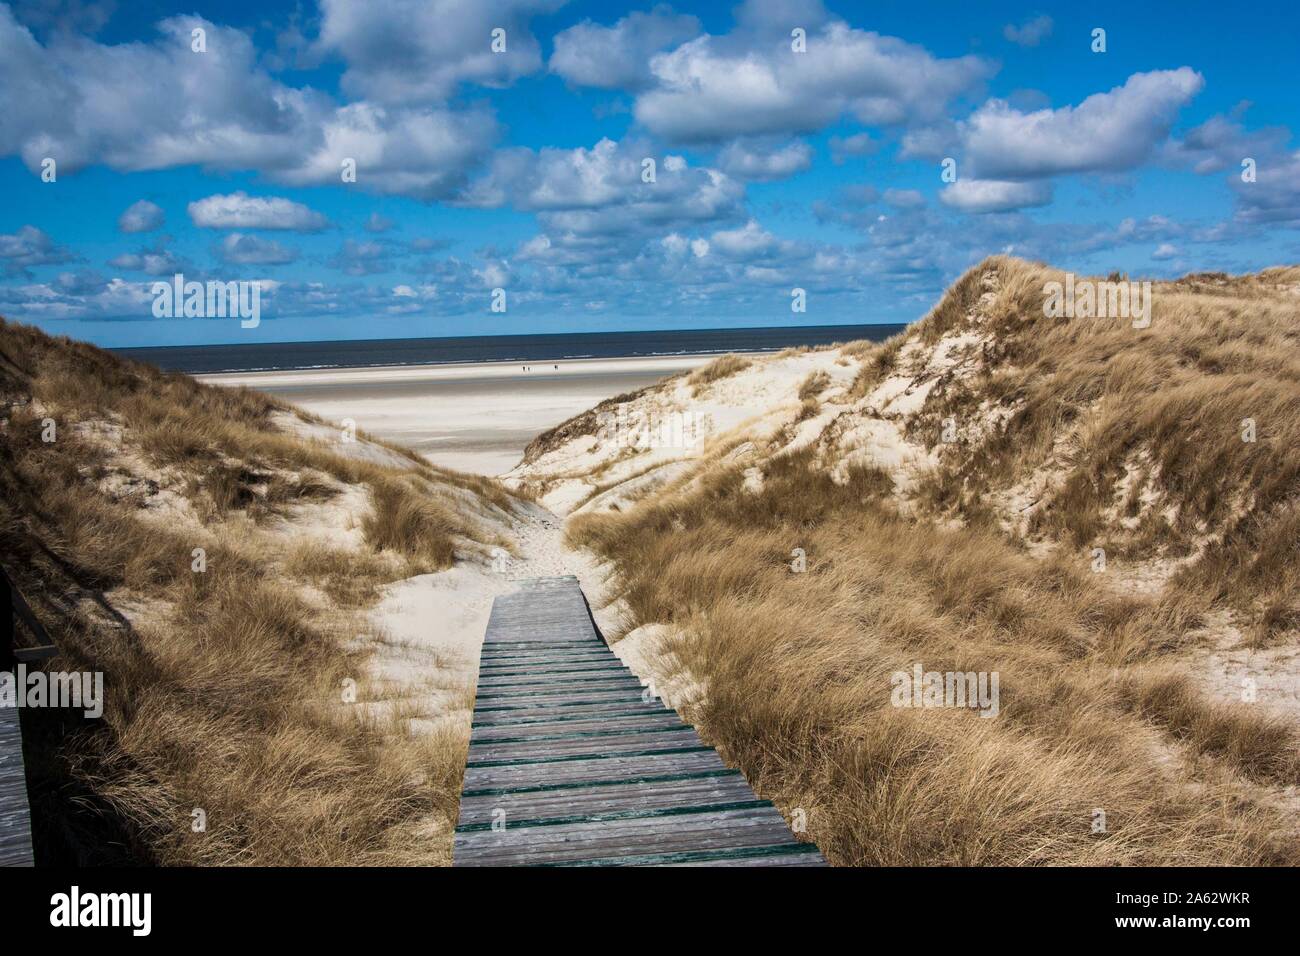 Amrum broadest widest beach, View from the dunes and little wooden foot path German island, Nordfriesland, North Frisia, North sea German sea Stock Photo